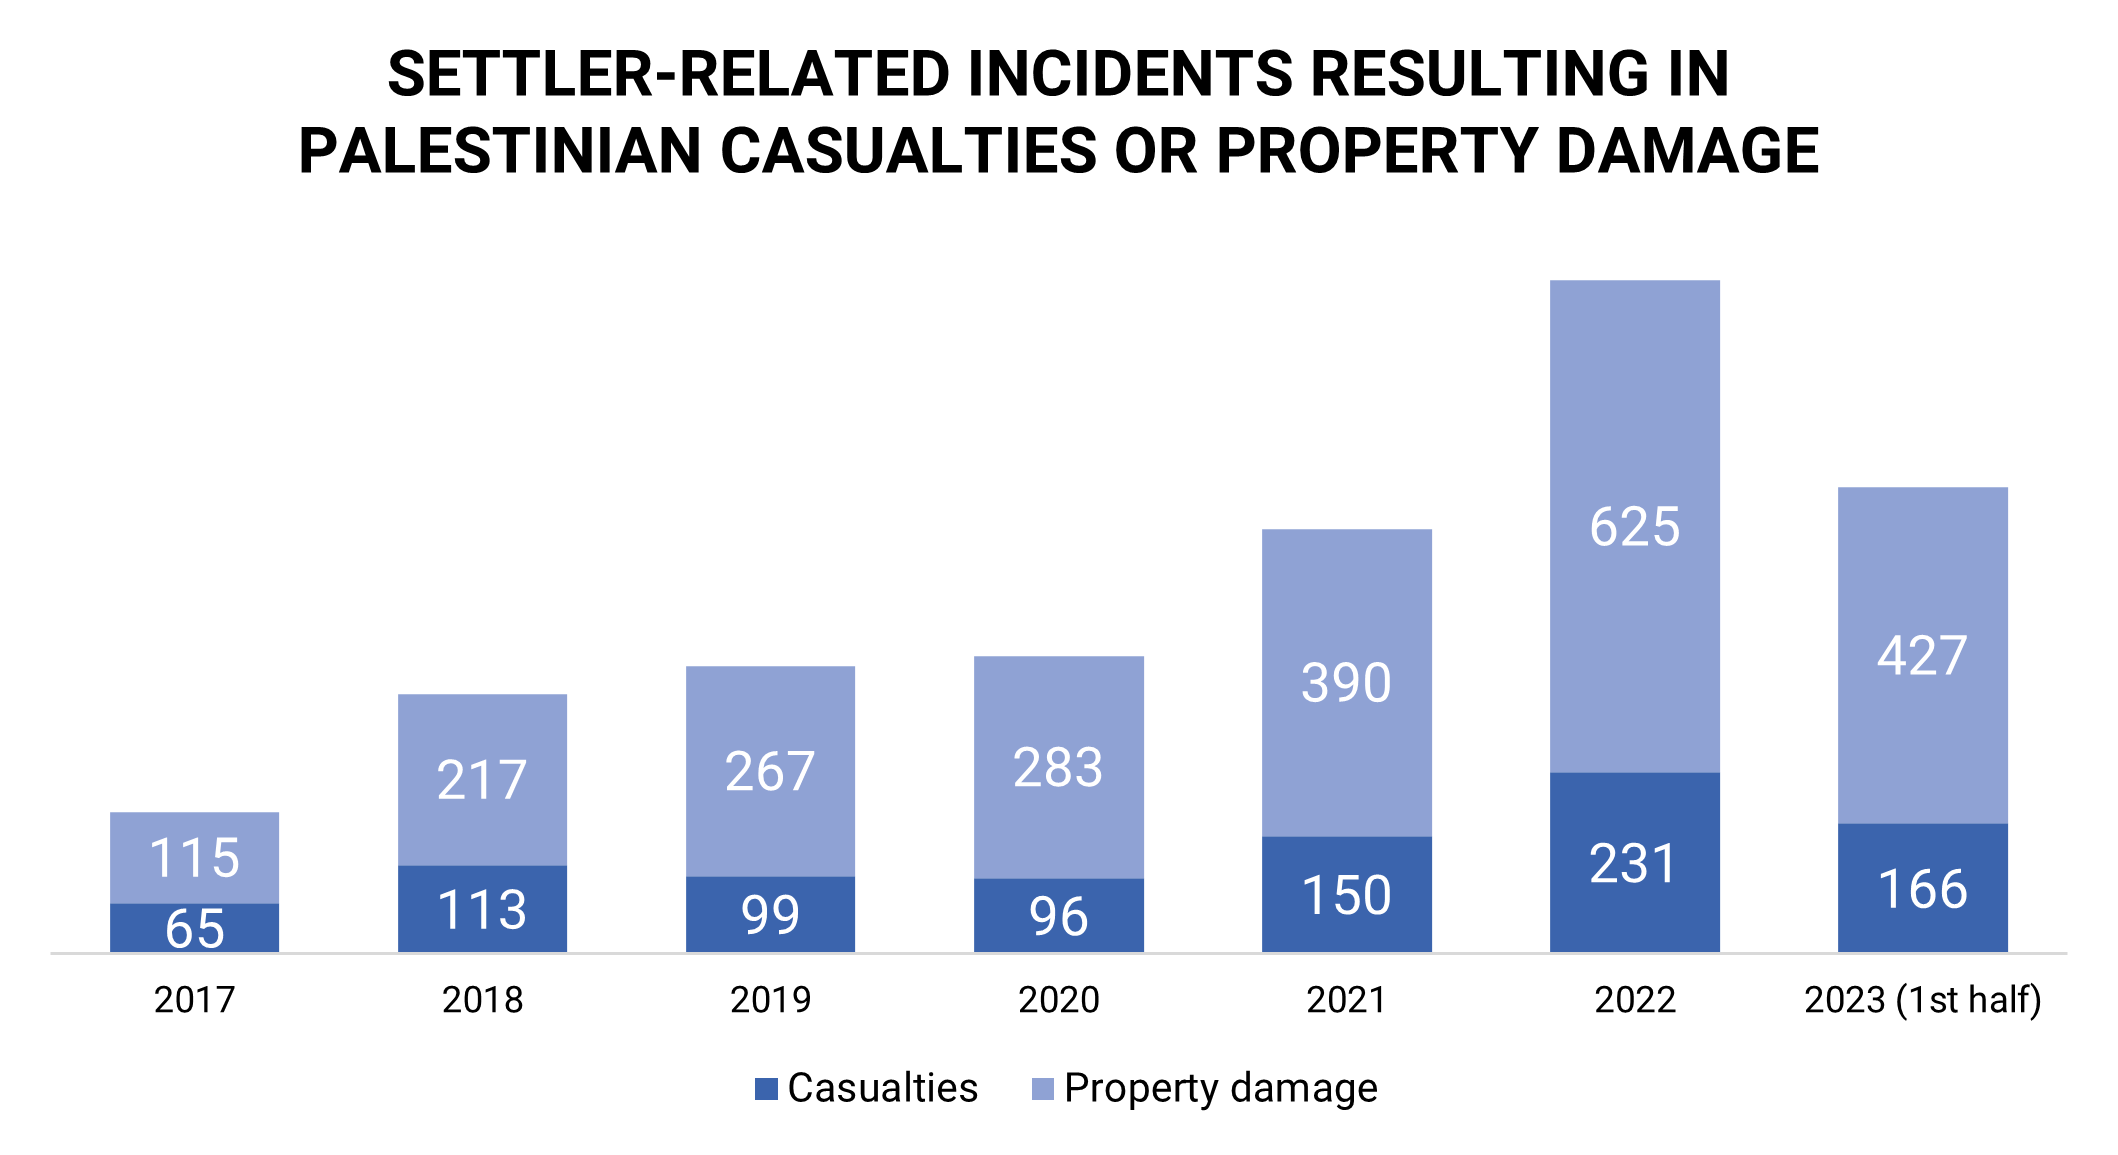 Chart showing an uptrend in settler-related incidents along the years